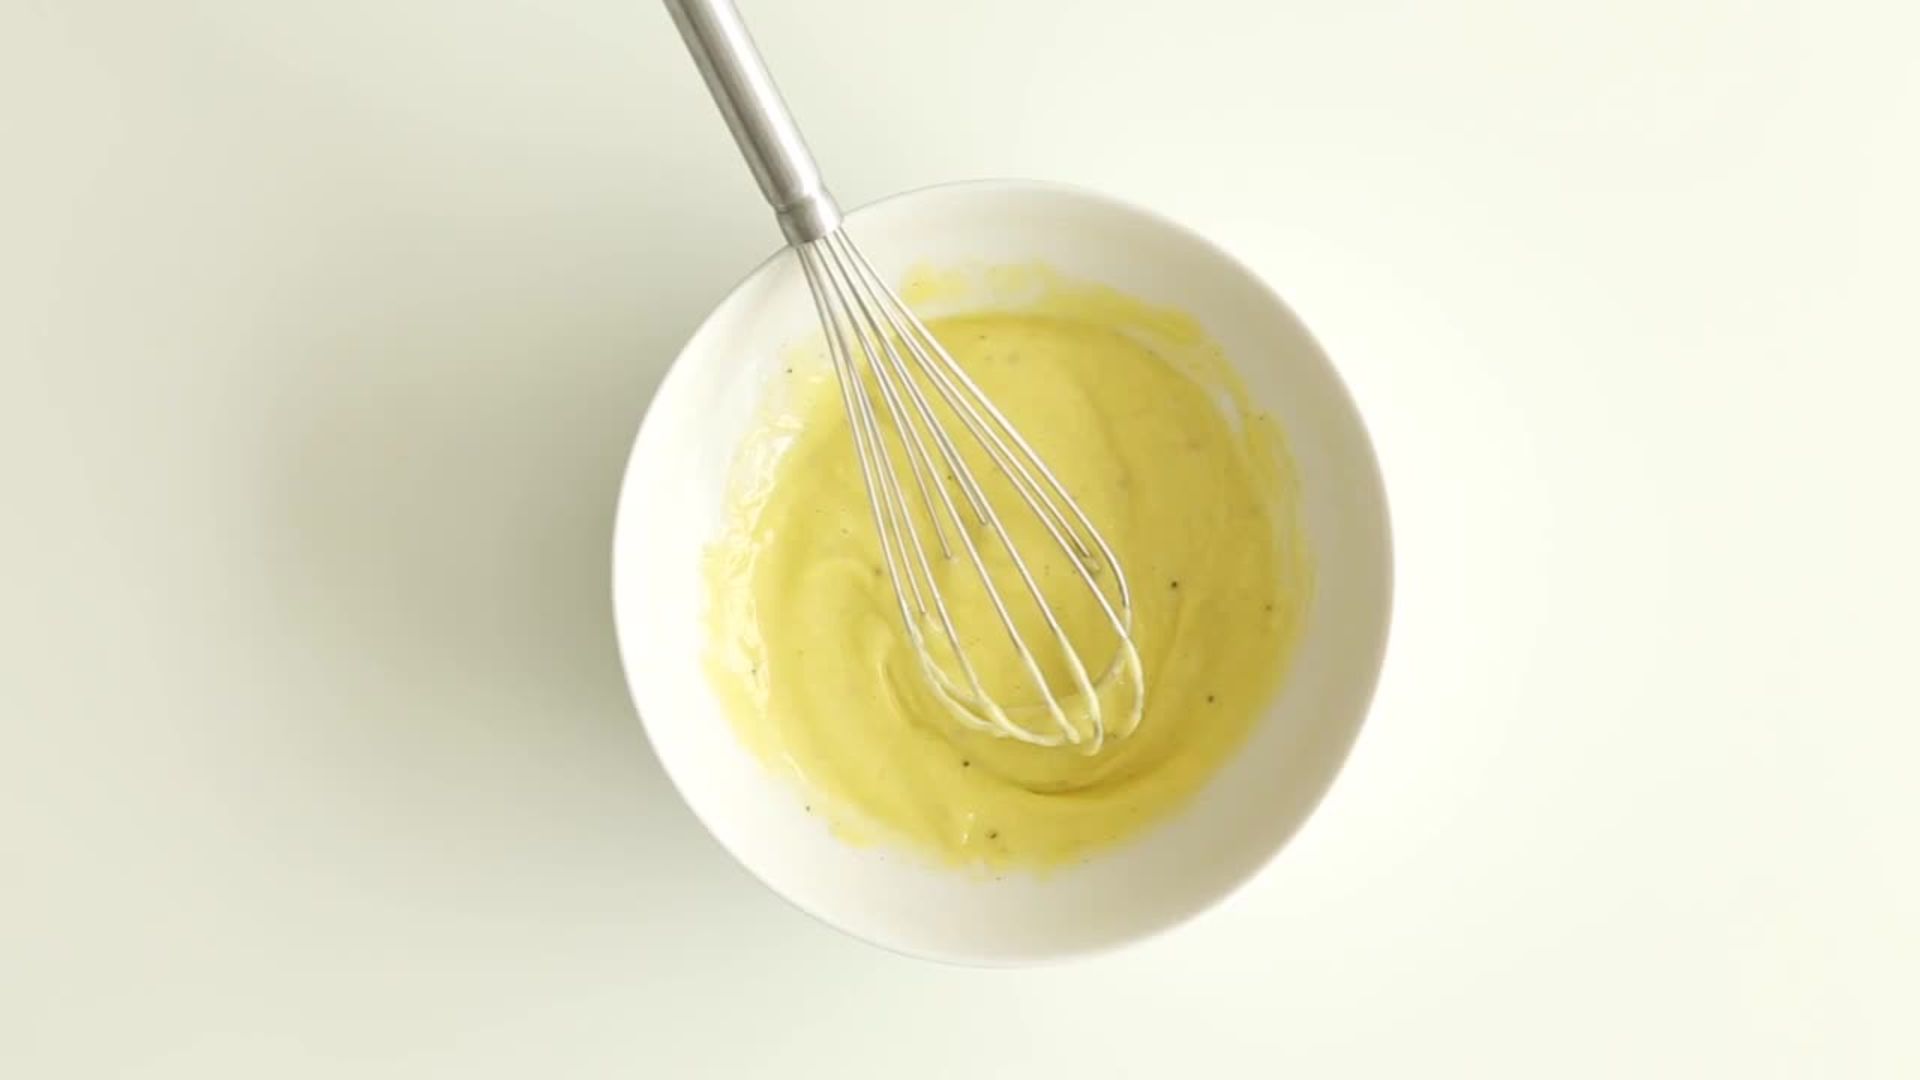 Ever Technique to Need—In Two Kitchen Bon Under | You\'ll 60 Aioli...In Seconds | Make How Watch Every Appétit Minutes